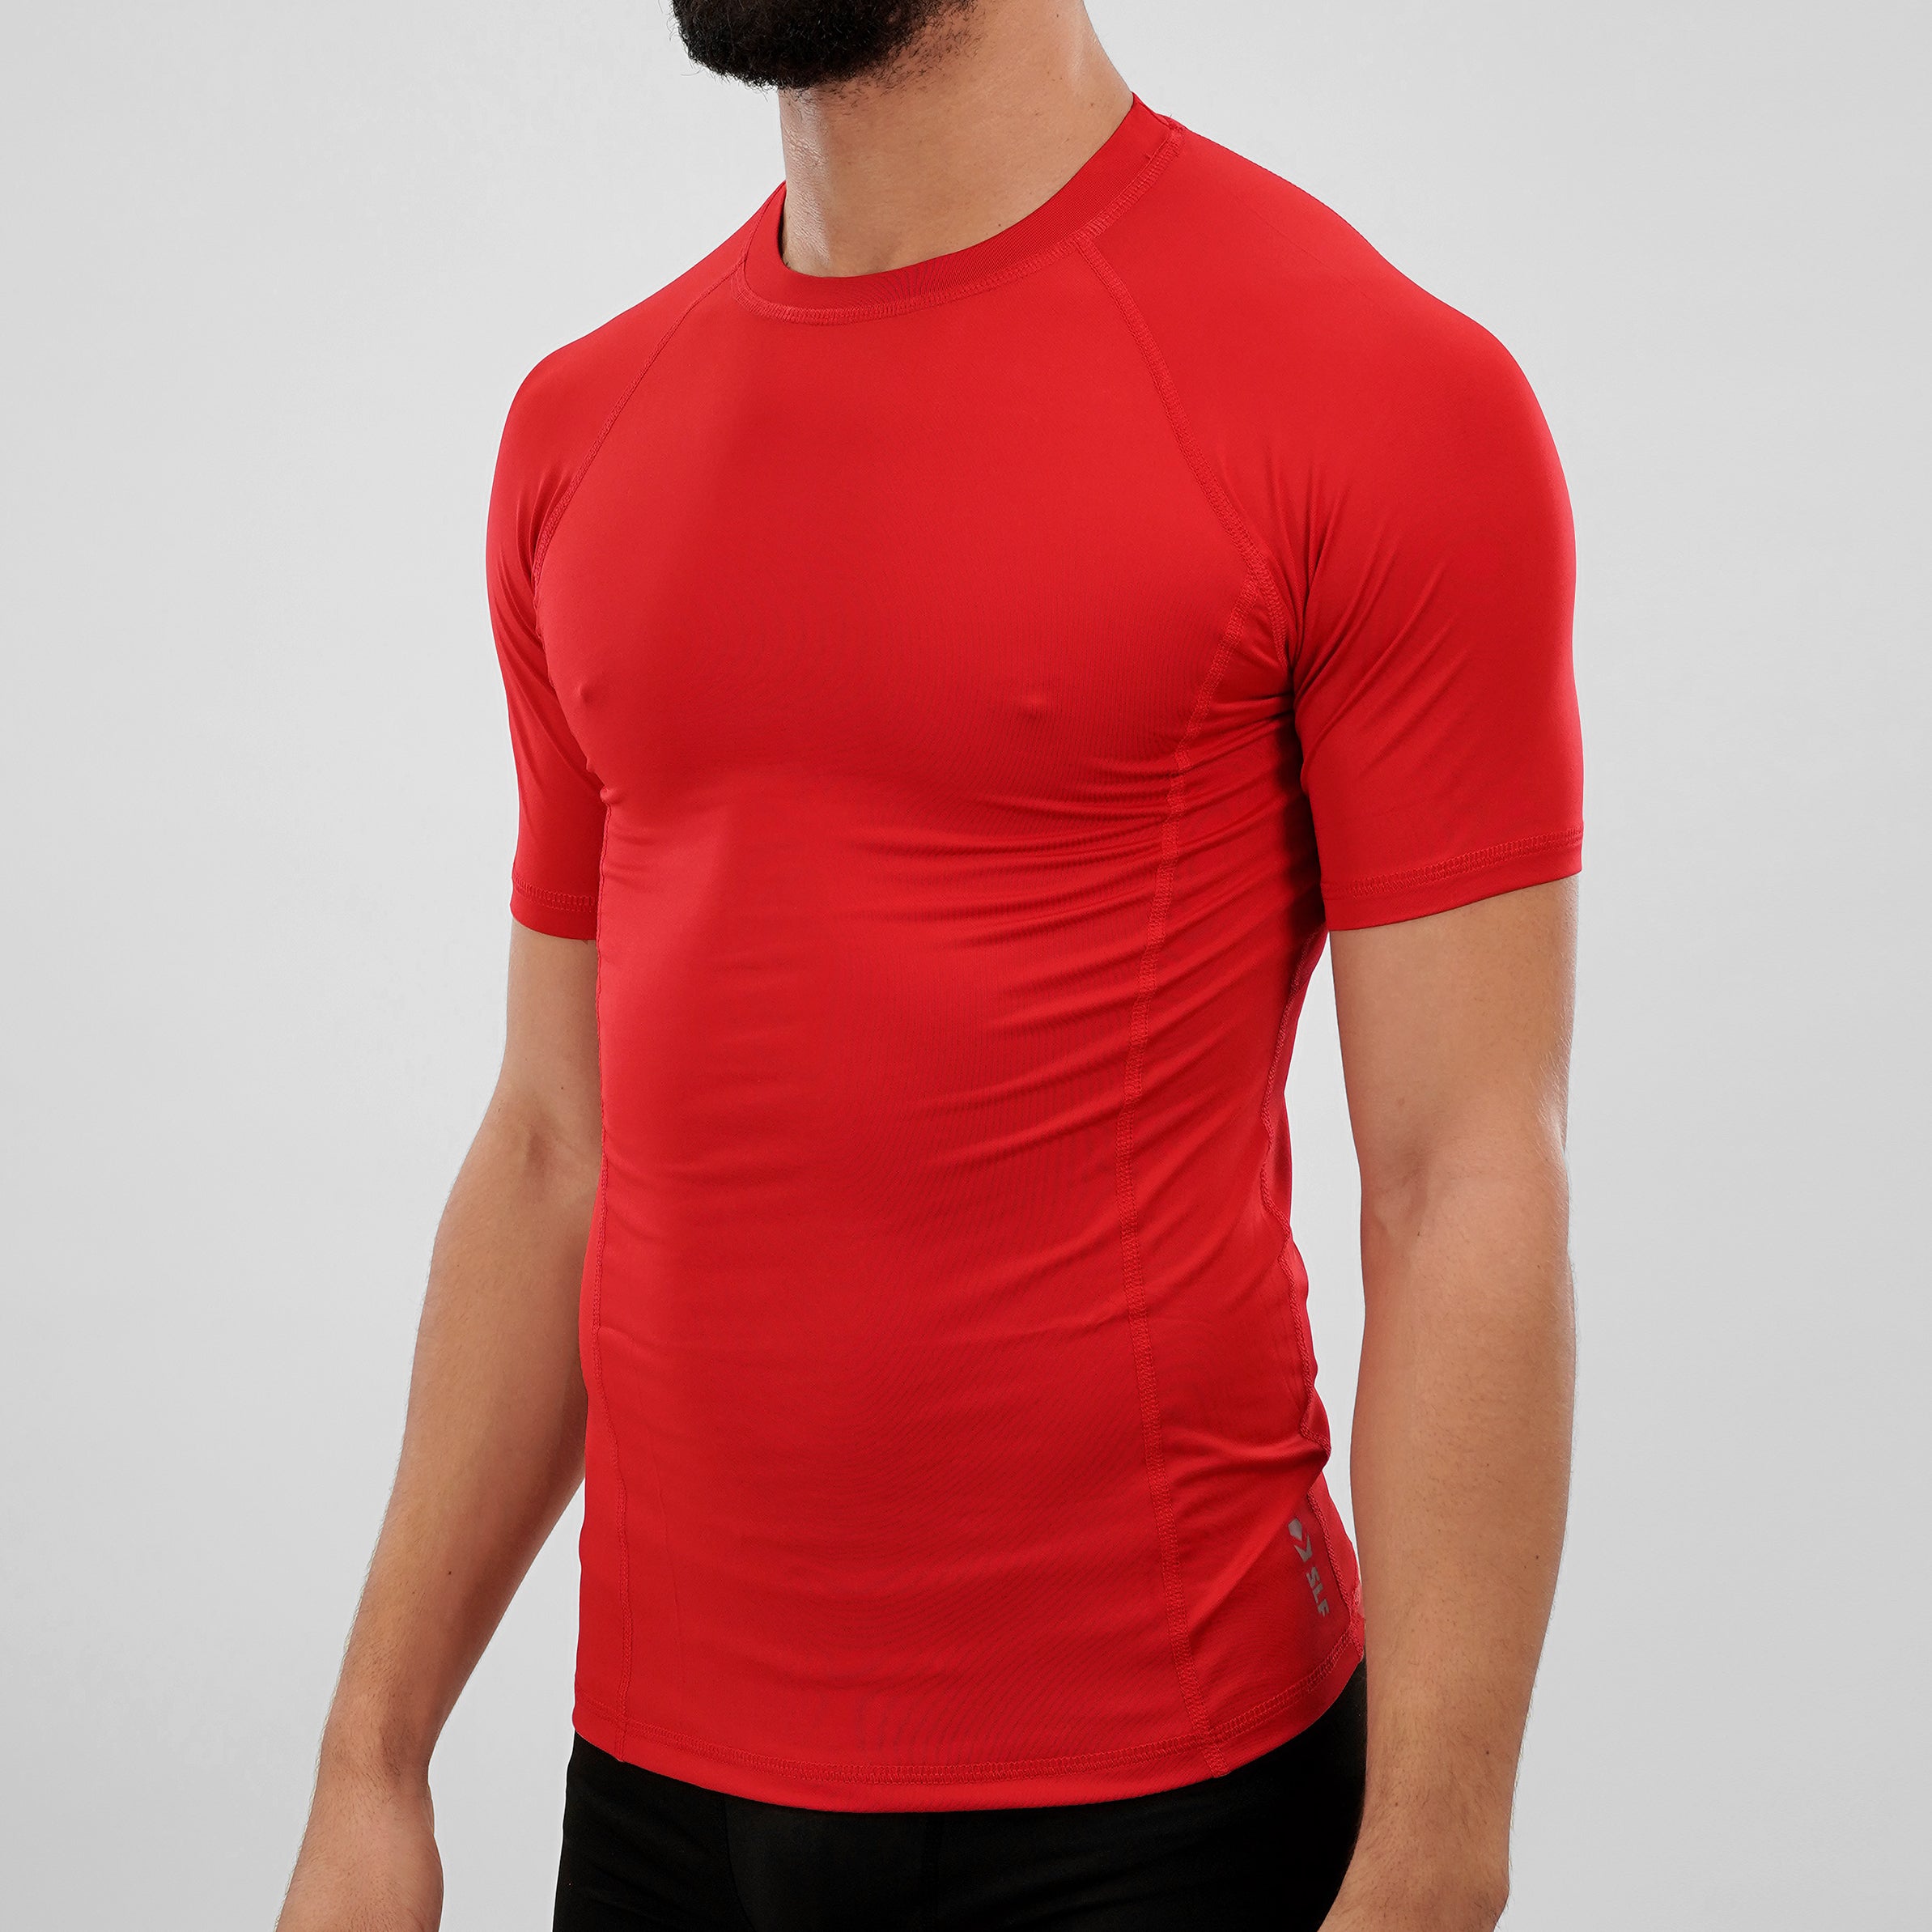 grøntsager synonymordbog R The perfect sleeveless compression shirt that won't disappoint - SLEEFS